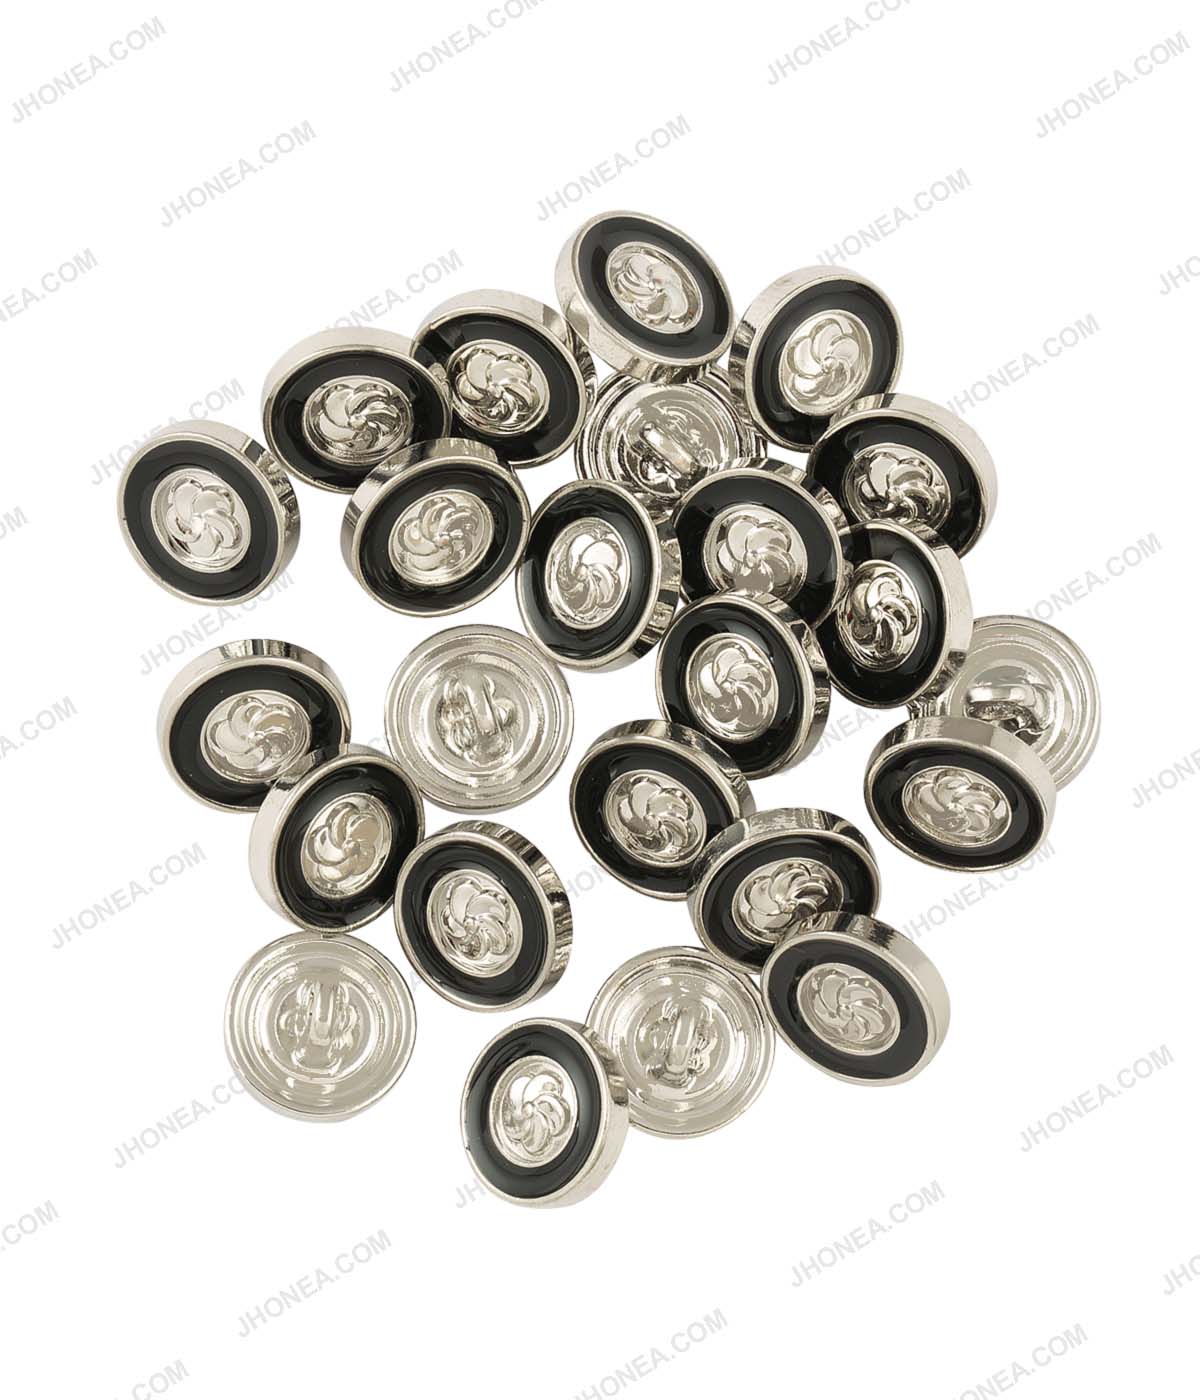 Shiny Embossed Flower Enamel Rim Border 10mm Shiny Silver with Black Color Shirt Buttons